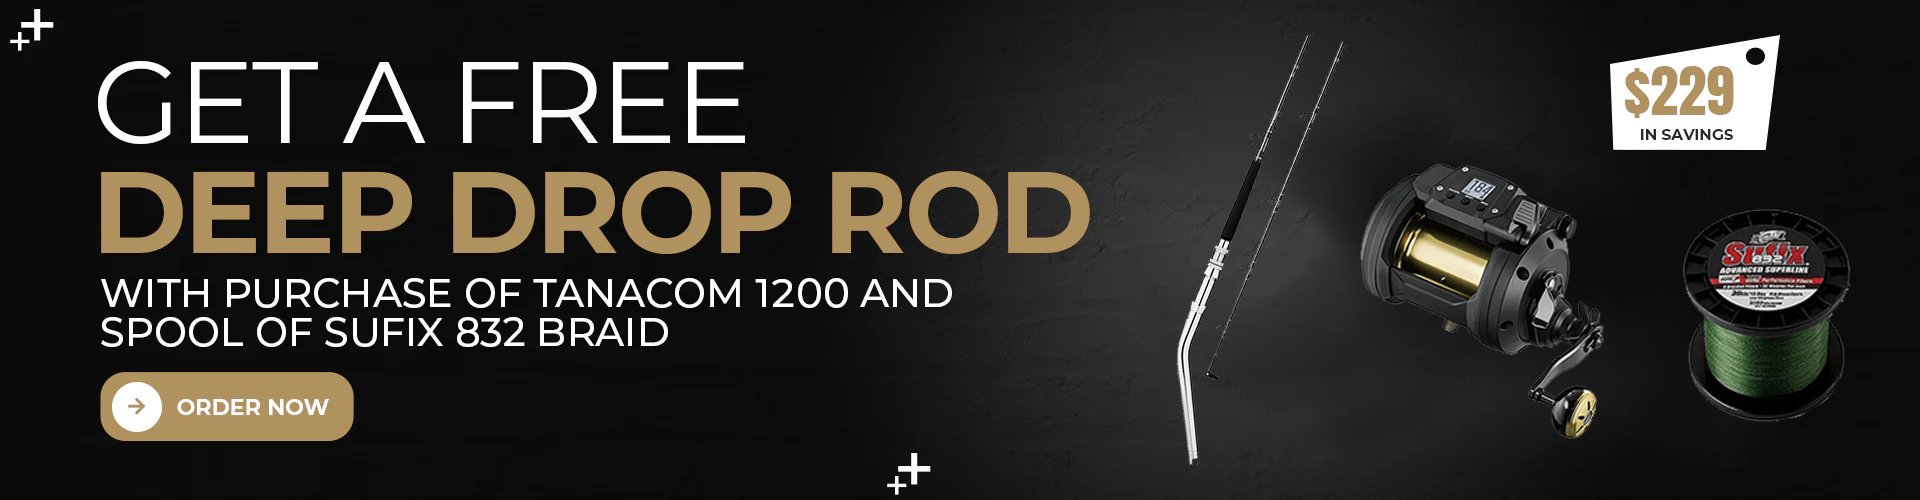 Get a free deep drop rod with purchase of a Tanacom 1200 and Spool of Sufix 832 braid